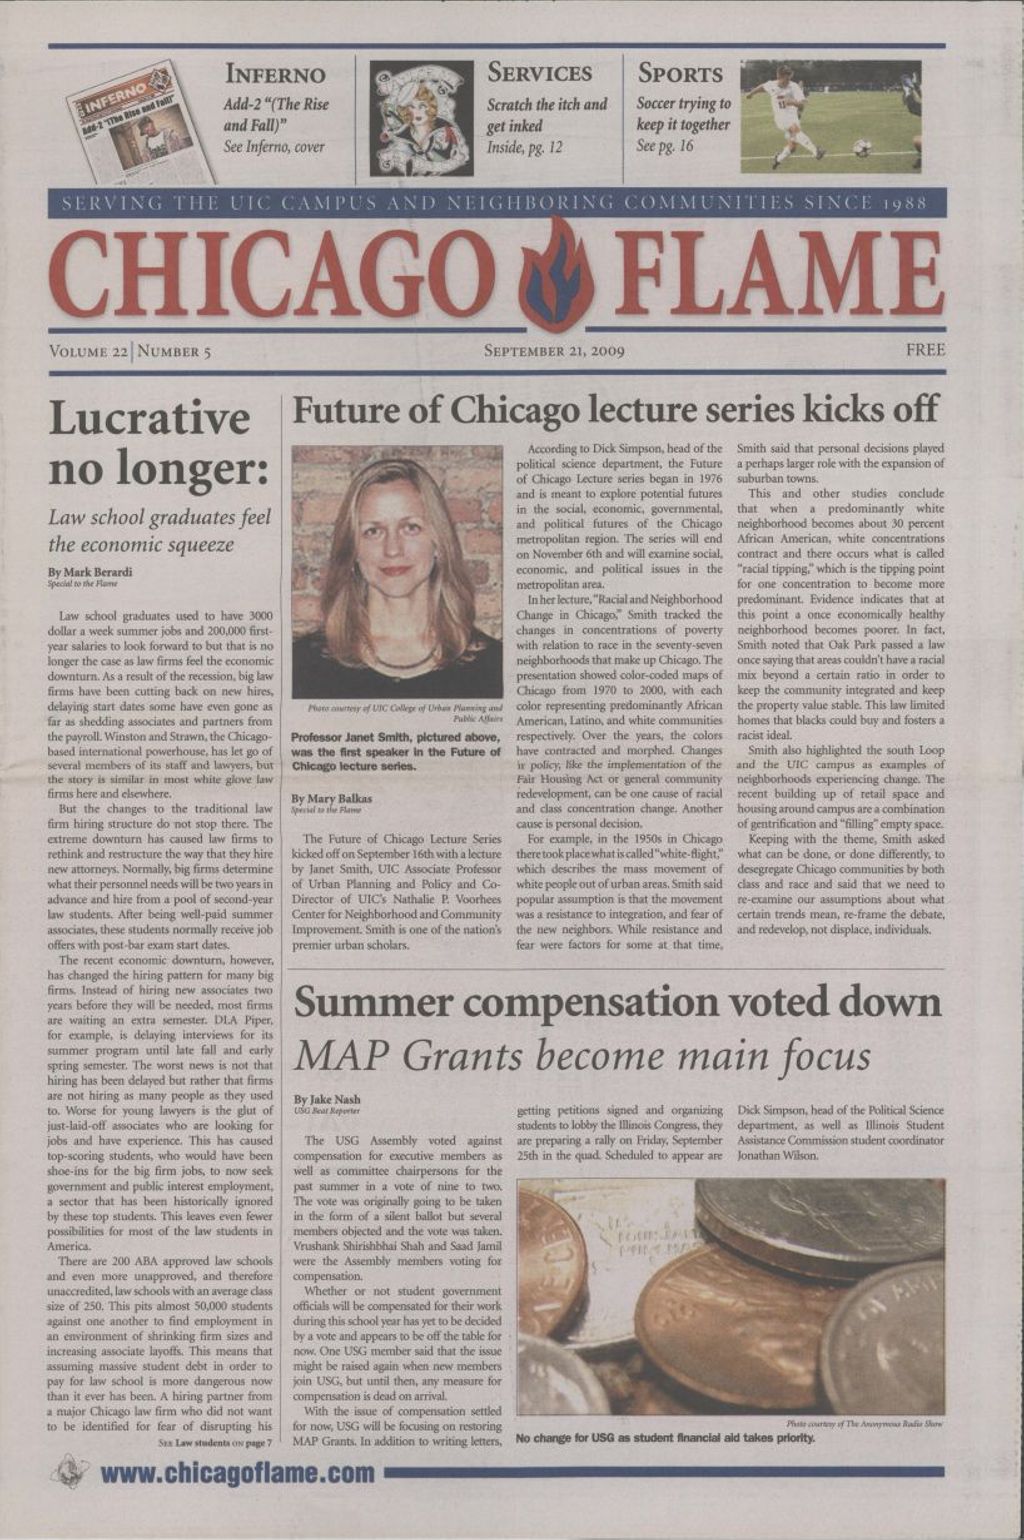 Miniature of Chicago Flame (September 21, 2009)